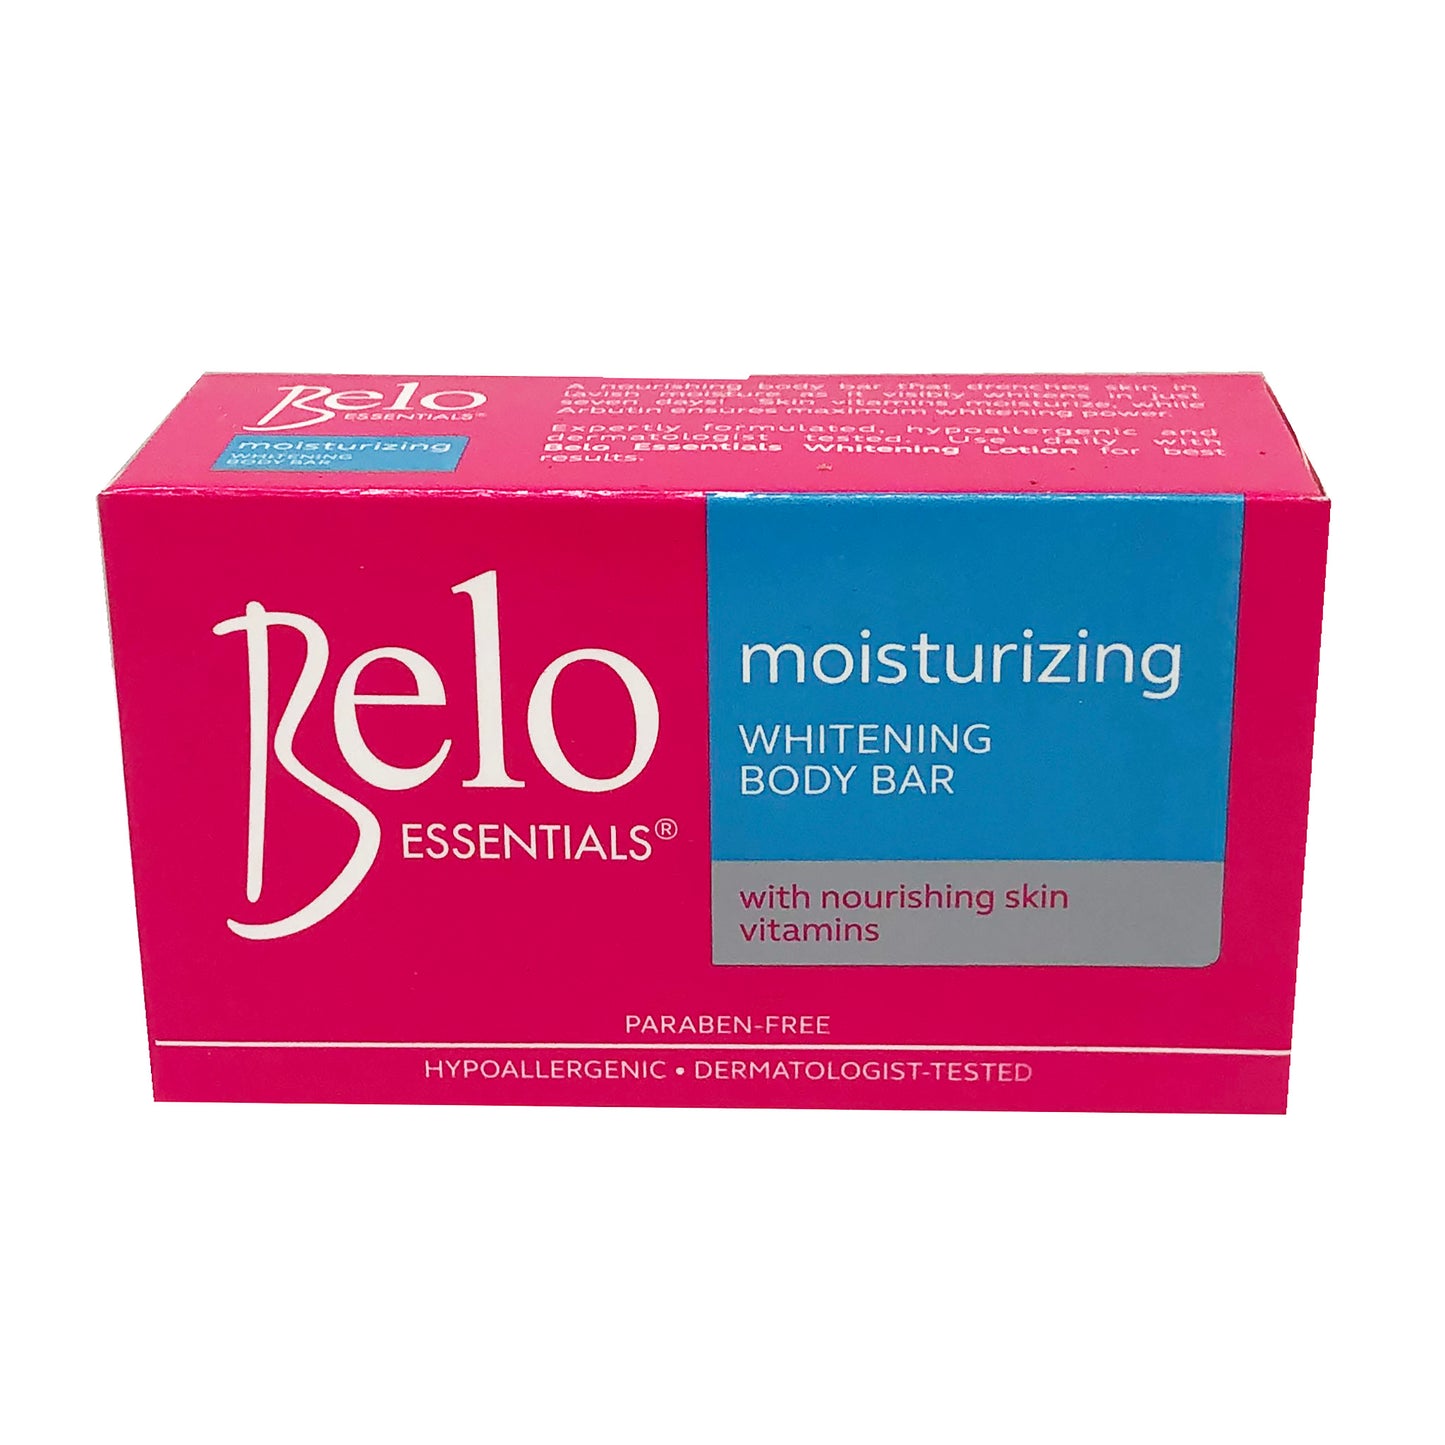 Front graphic view of Belo Moisturizing Whitening Body Bar Soap - Blue 4.76oz